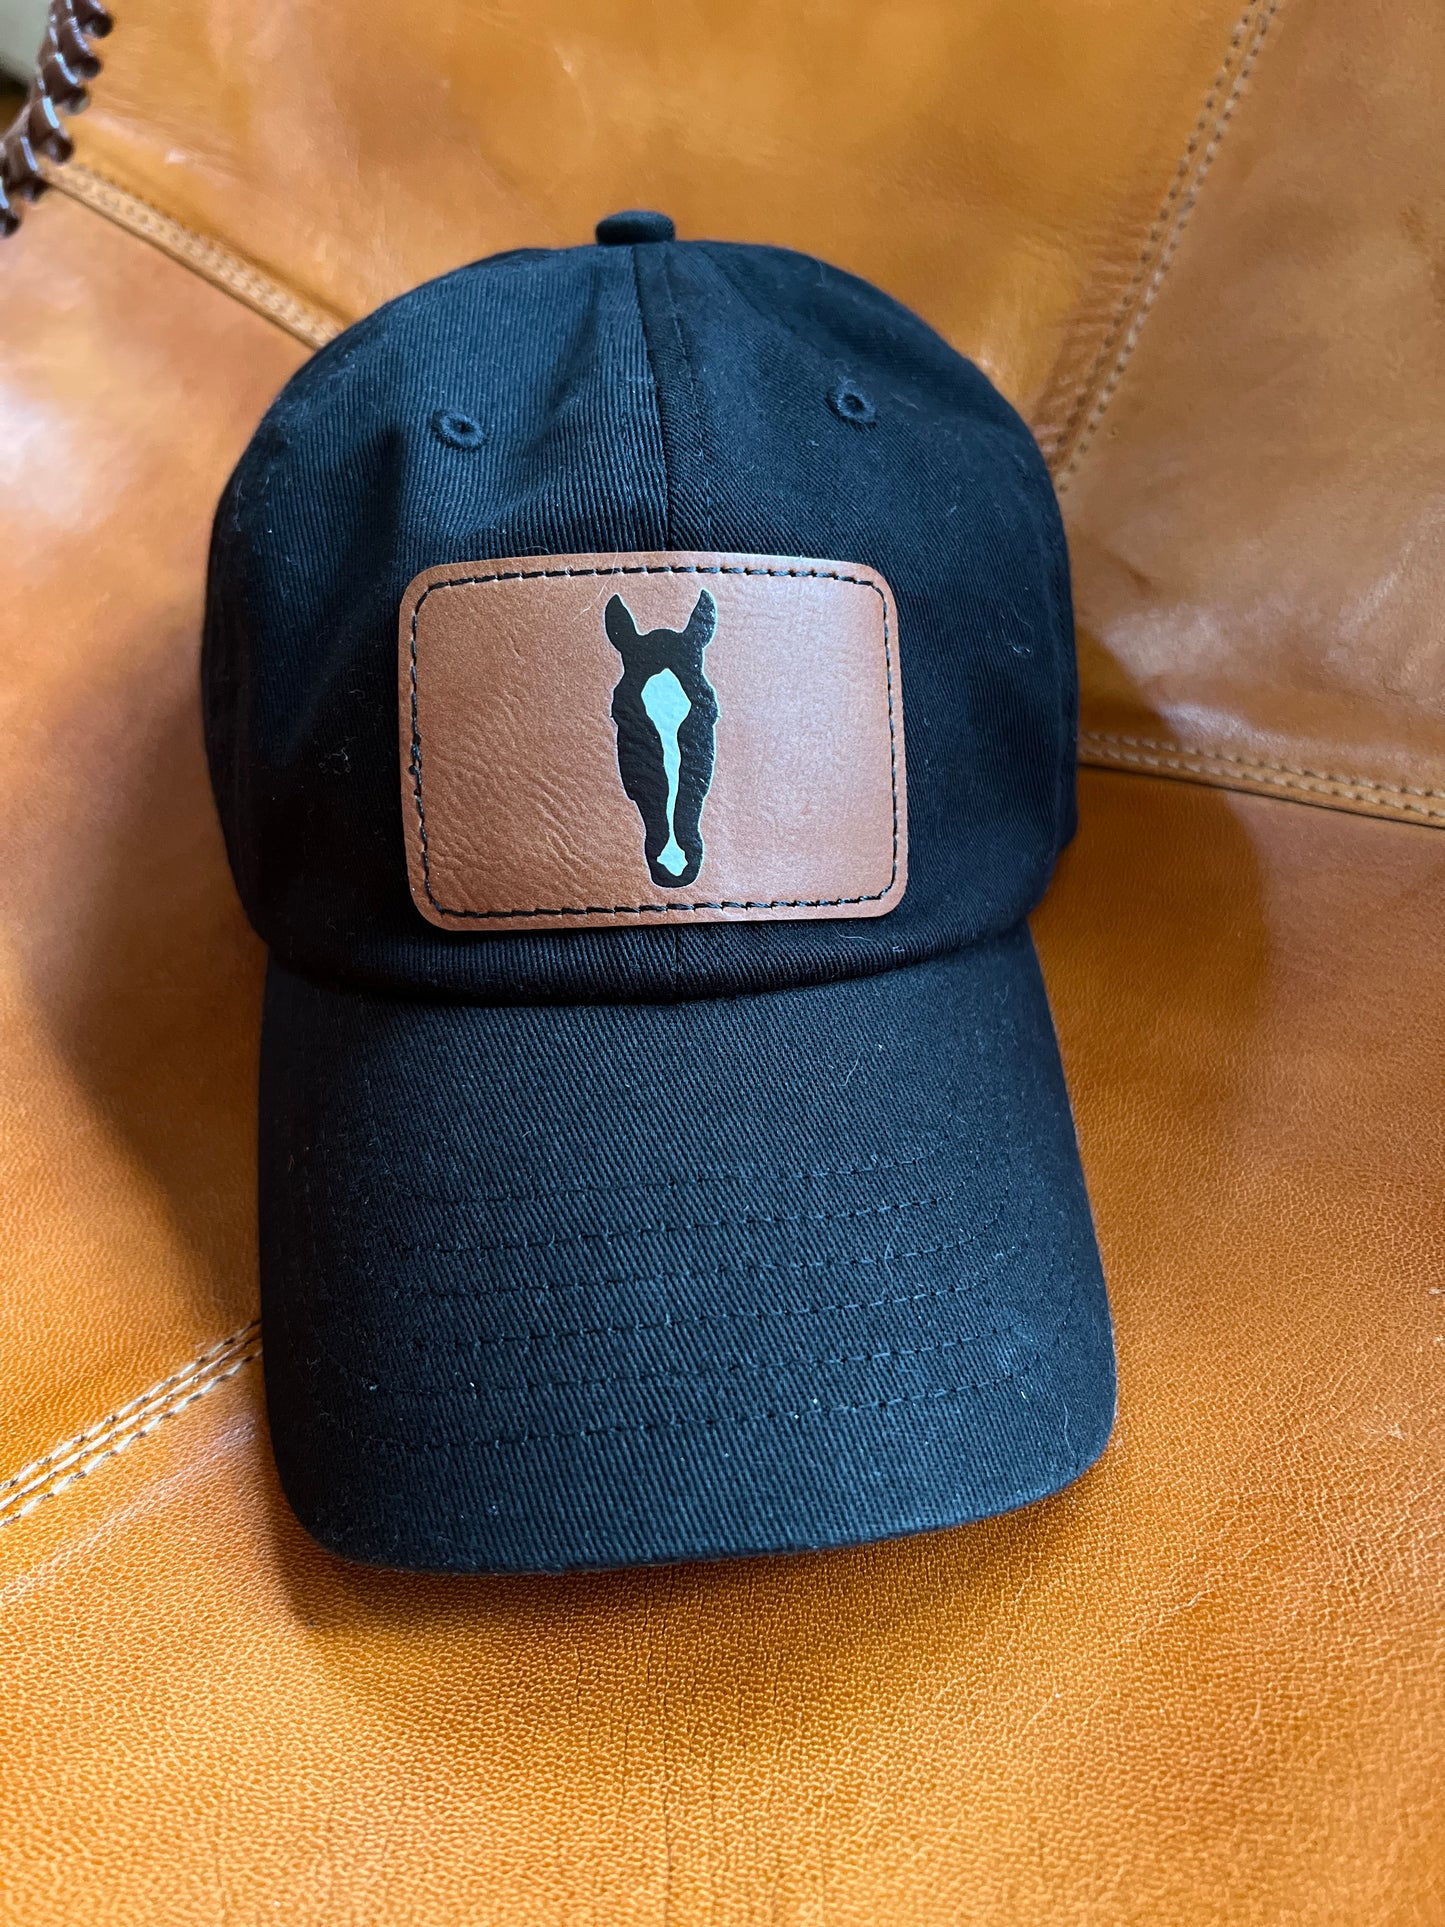 Custom Horse Silhouette Hat with Leather Patch